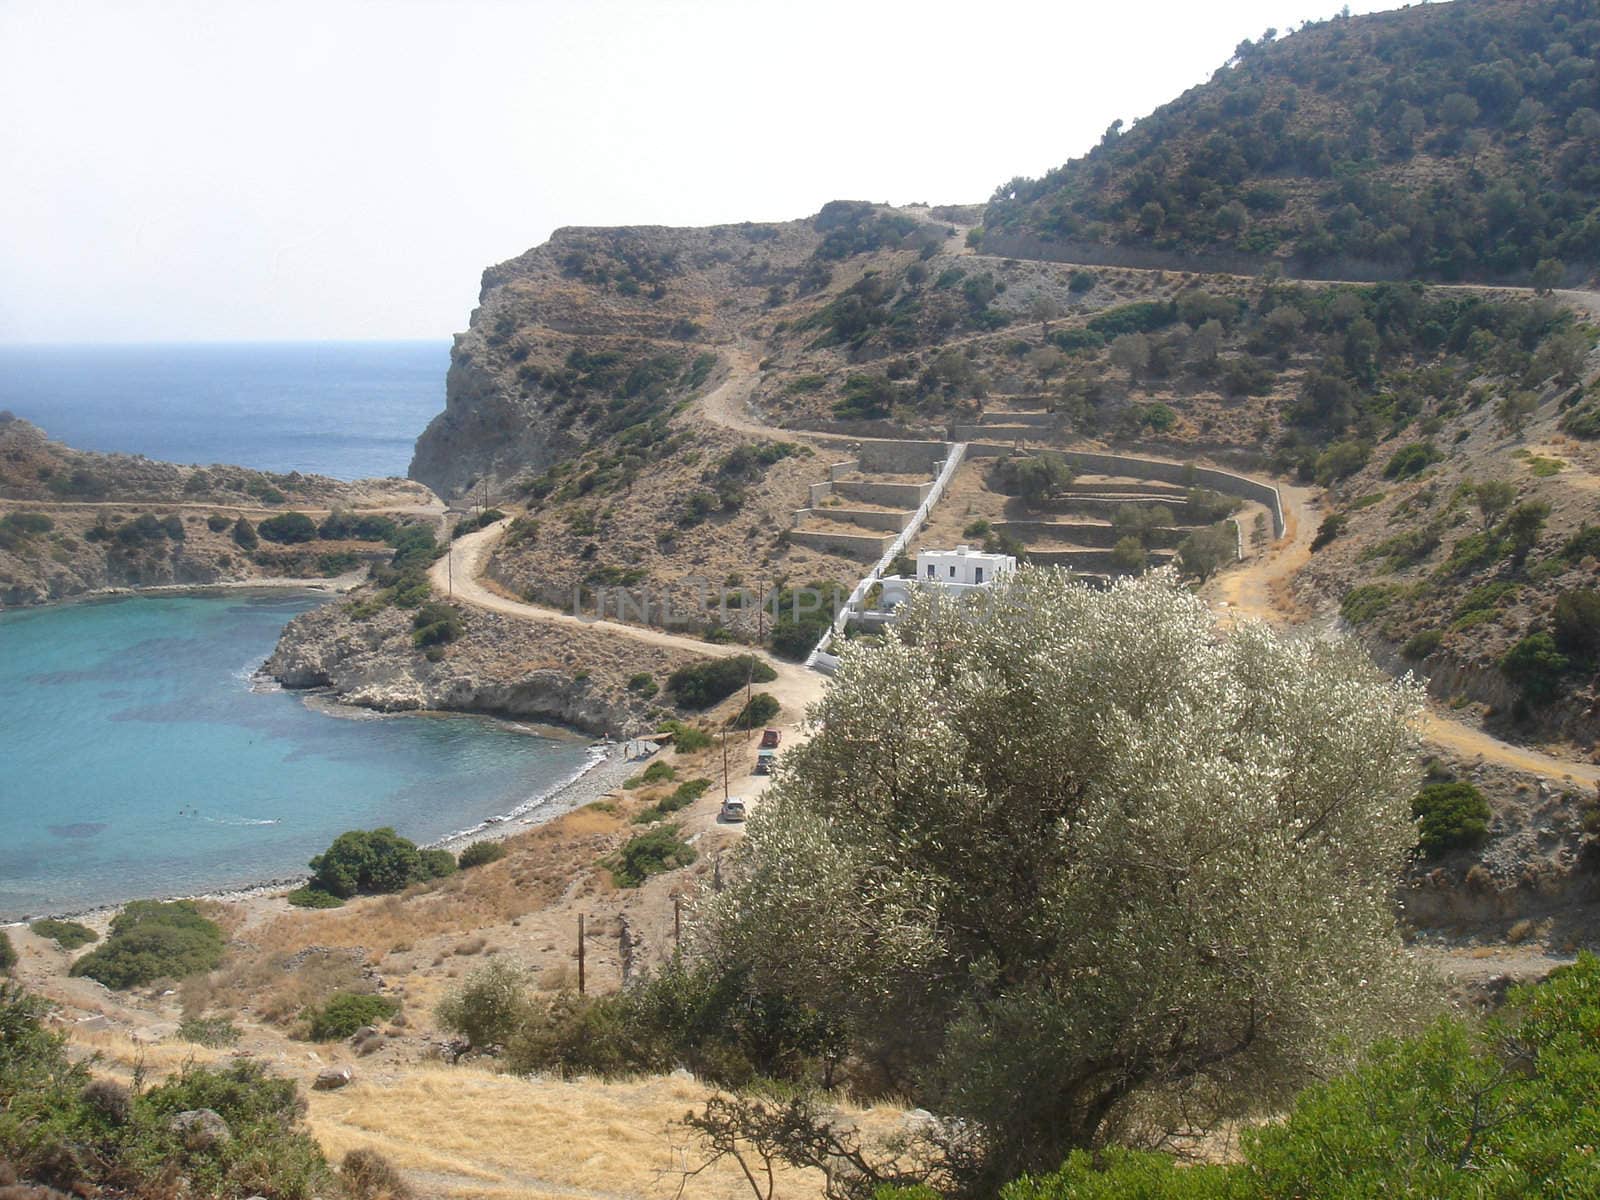 View of terraces and roads near the sea by mulden